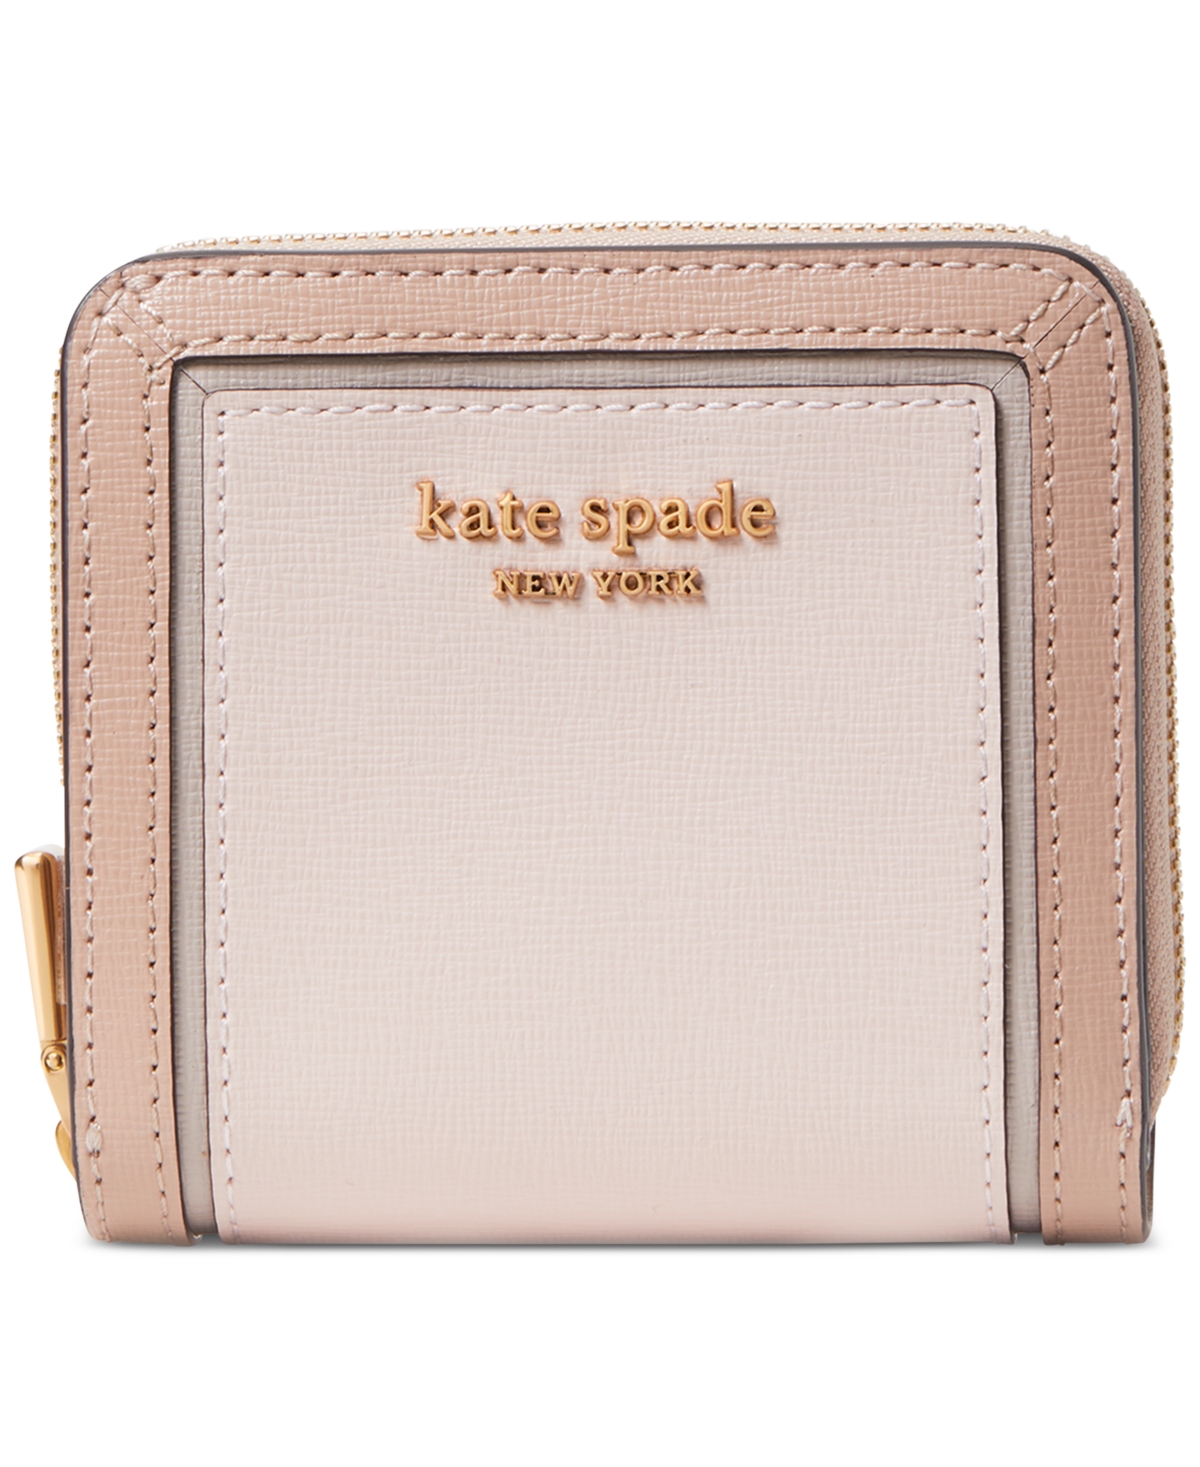 Kate Spade Morgan Colorblocked Saffiano Leather Compact Wallet In Pale Dogwood Multi